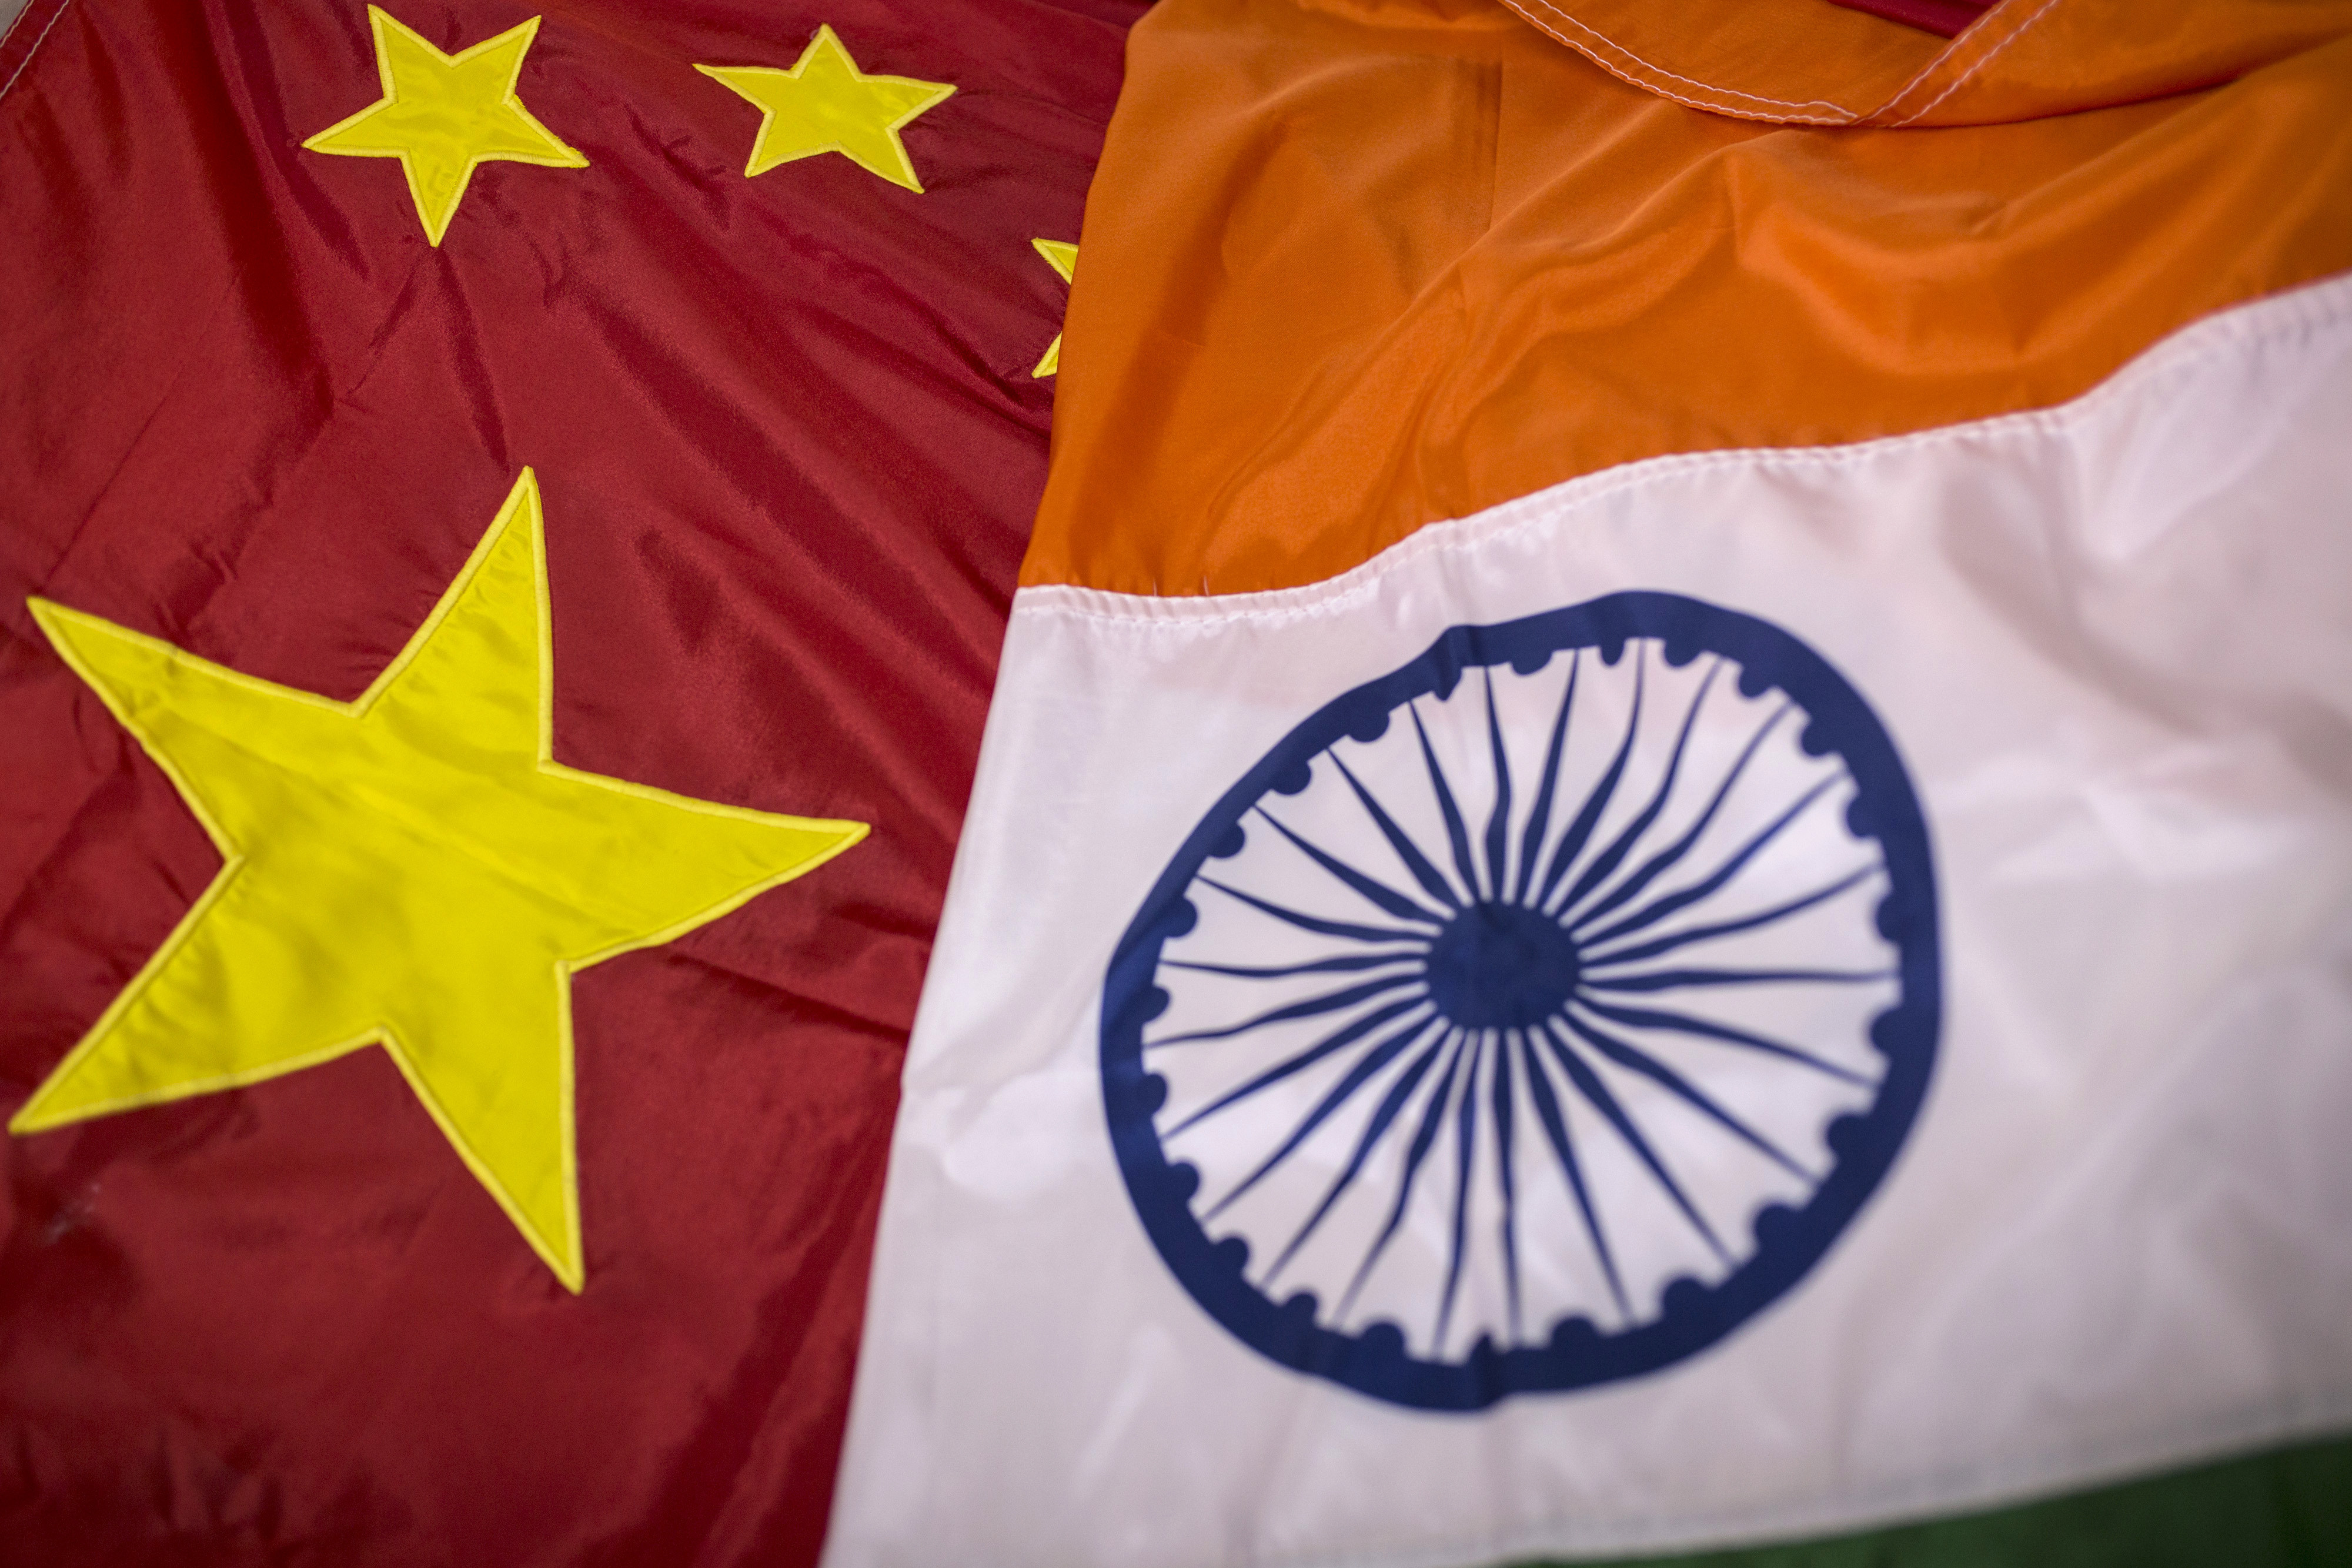 India is likely to avoid direct confrontation with China over the South China Sea as long as Beijing does not encroach on New Delhi’s core maritime interests, according to a former Indian naval officer. Photo: Bloomberg